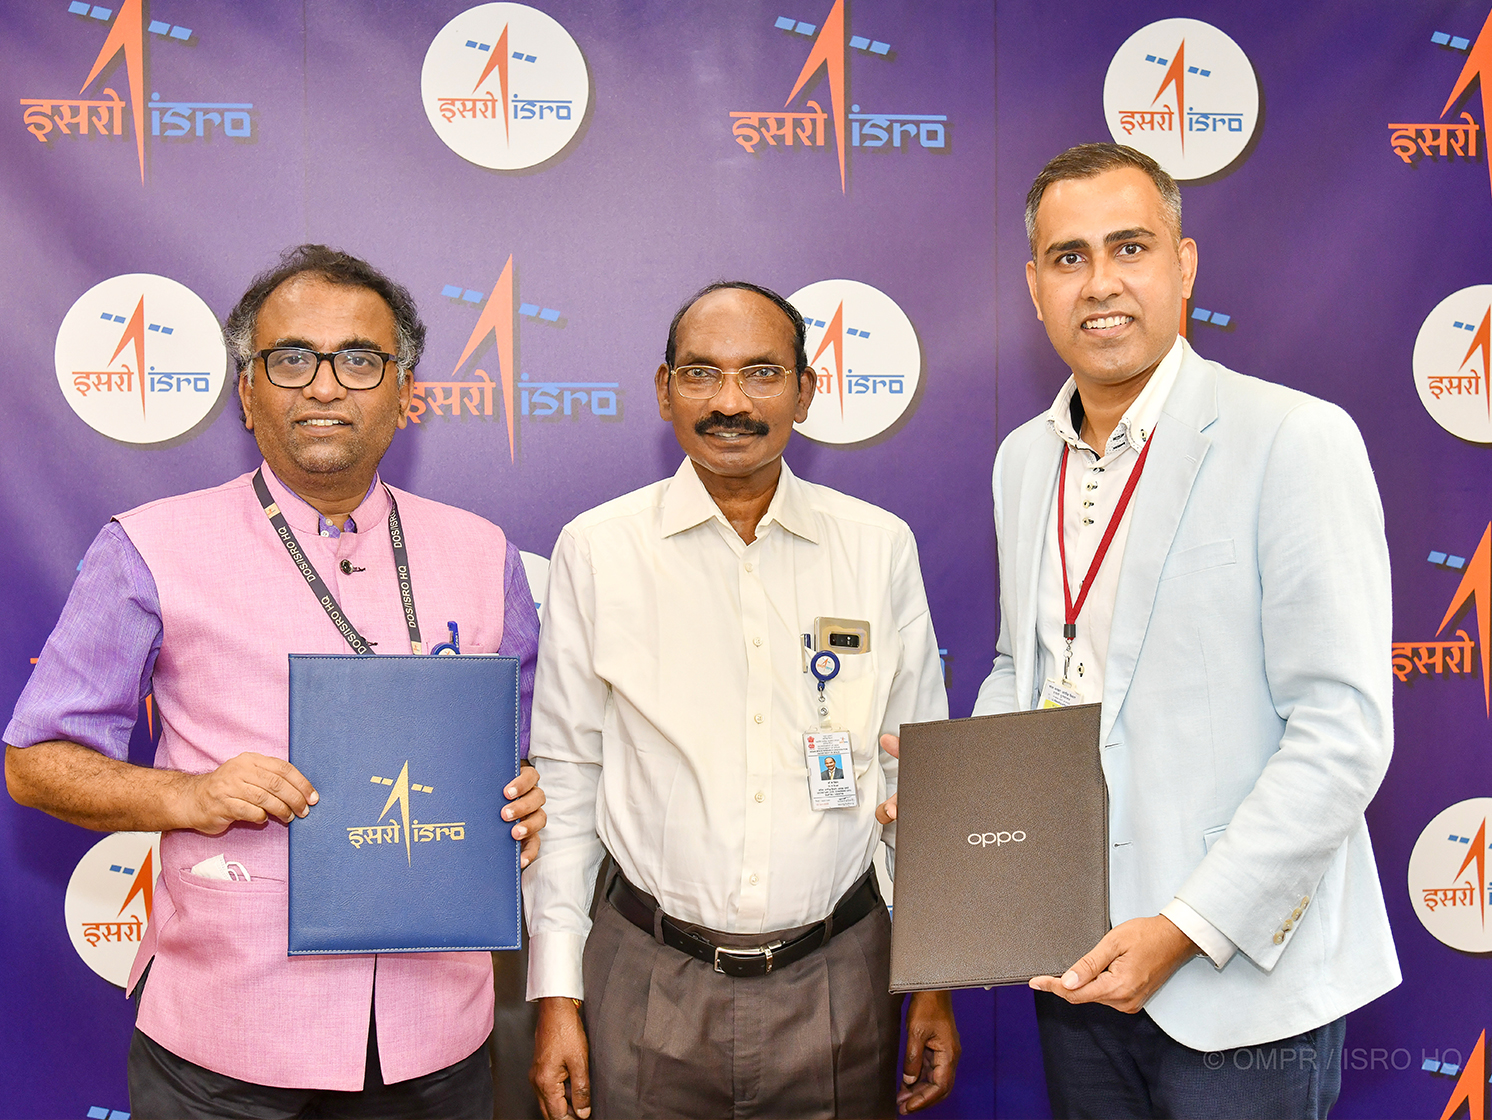 ISRO & OPPO India Collaborates To Provide NavIC Application, Paving Way For Atmanirbhar Bharat decoding=